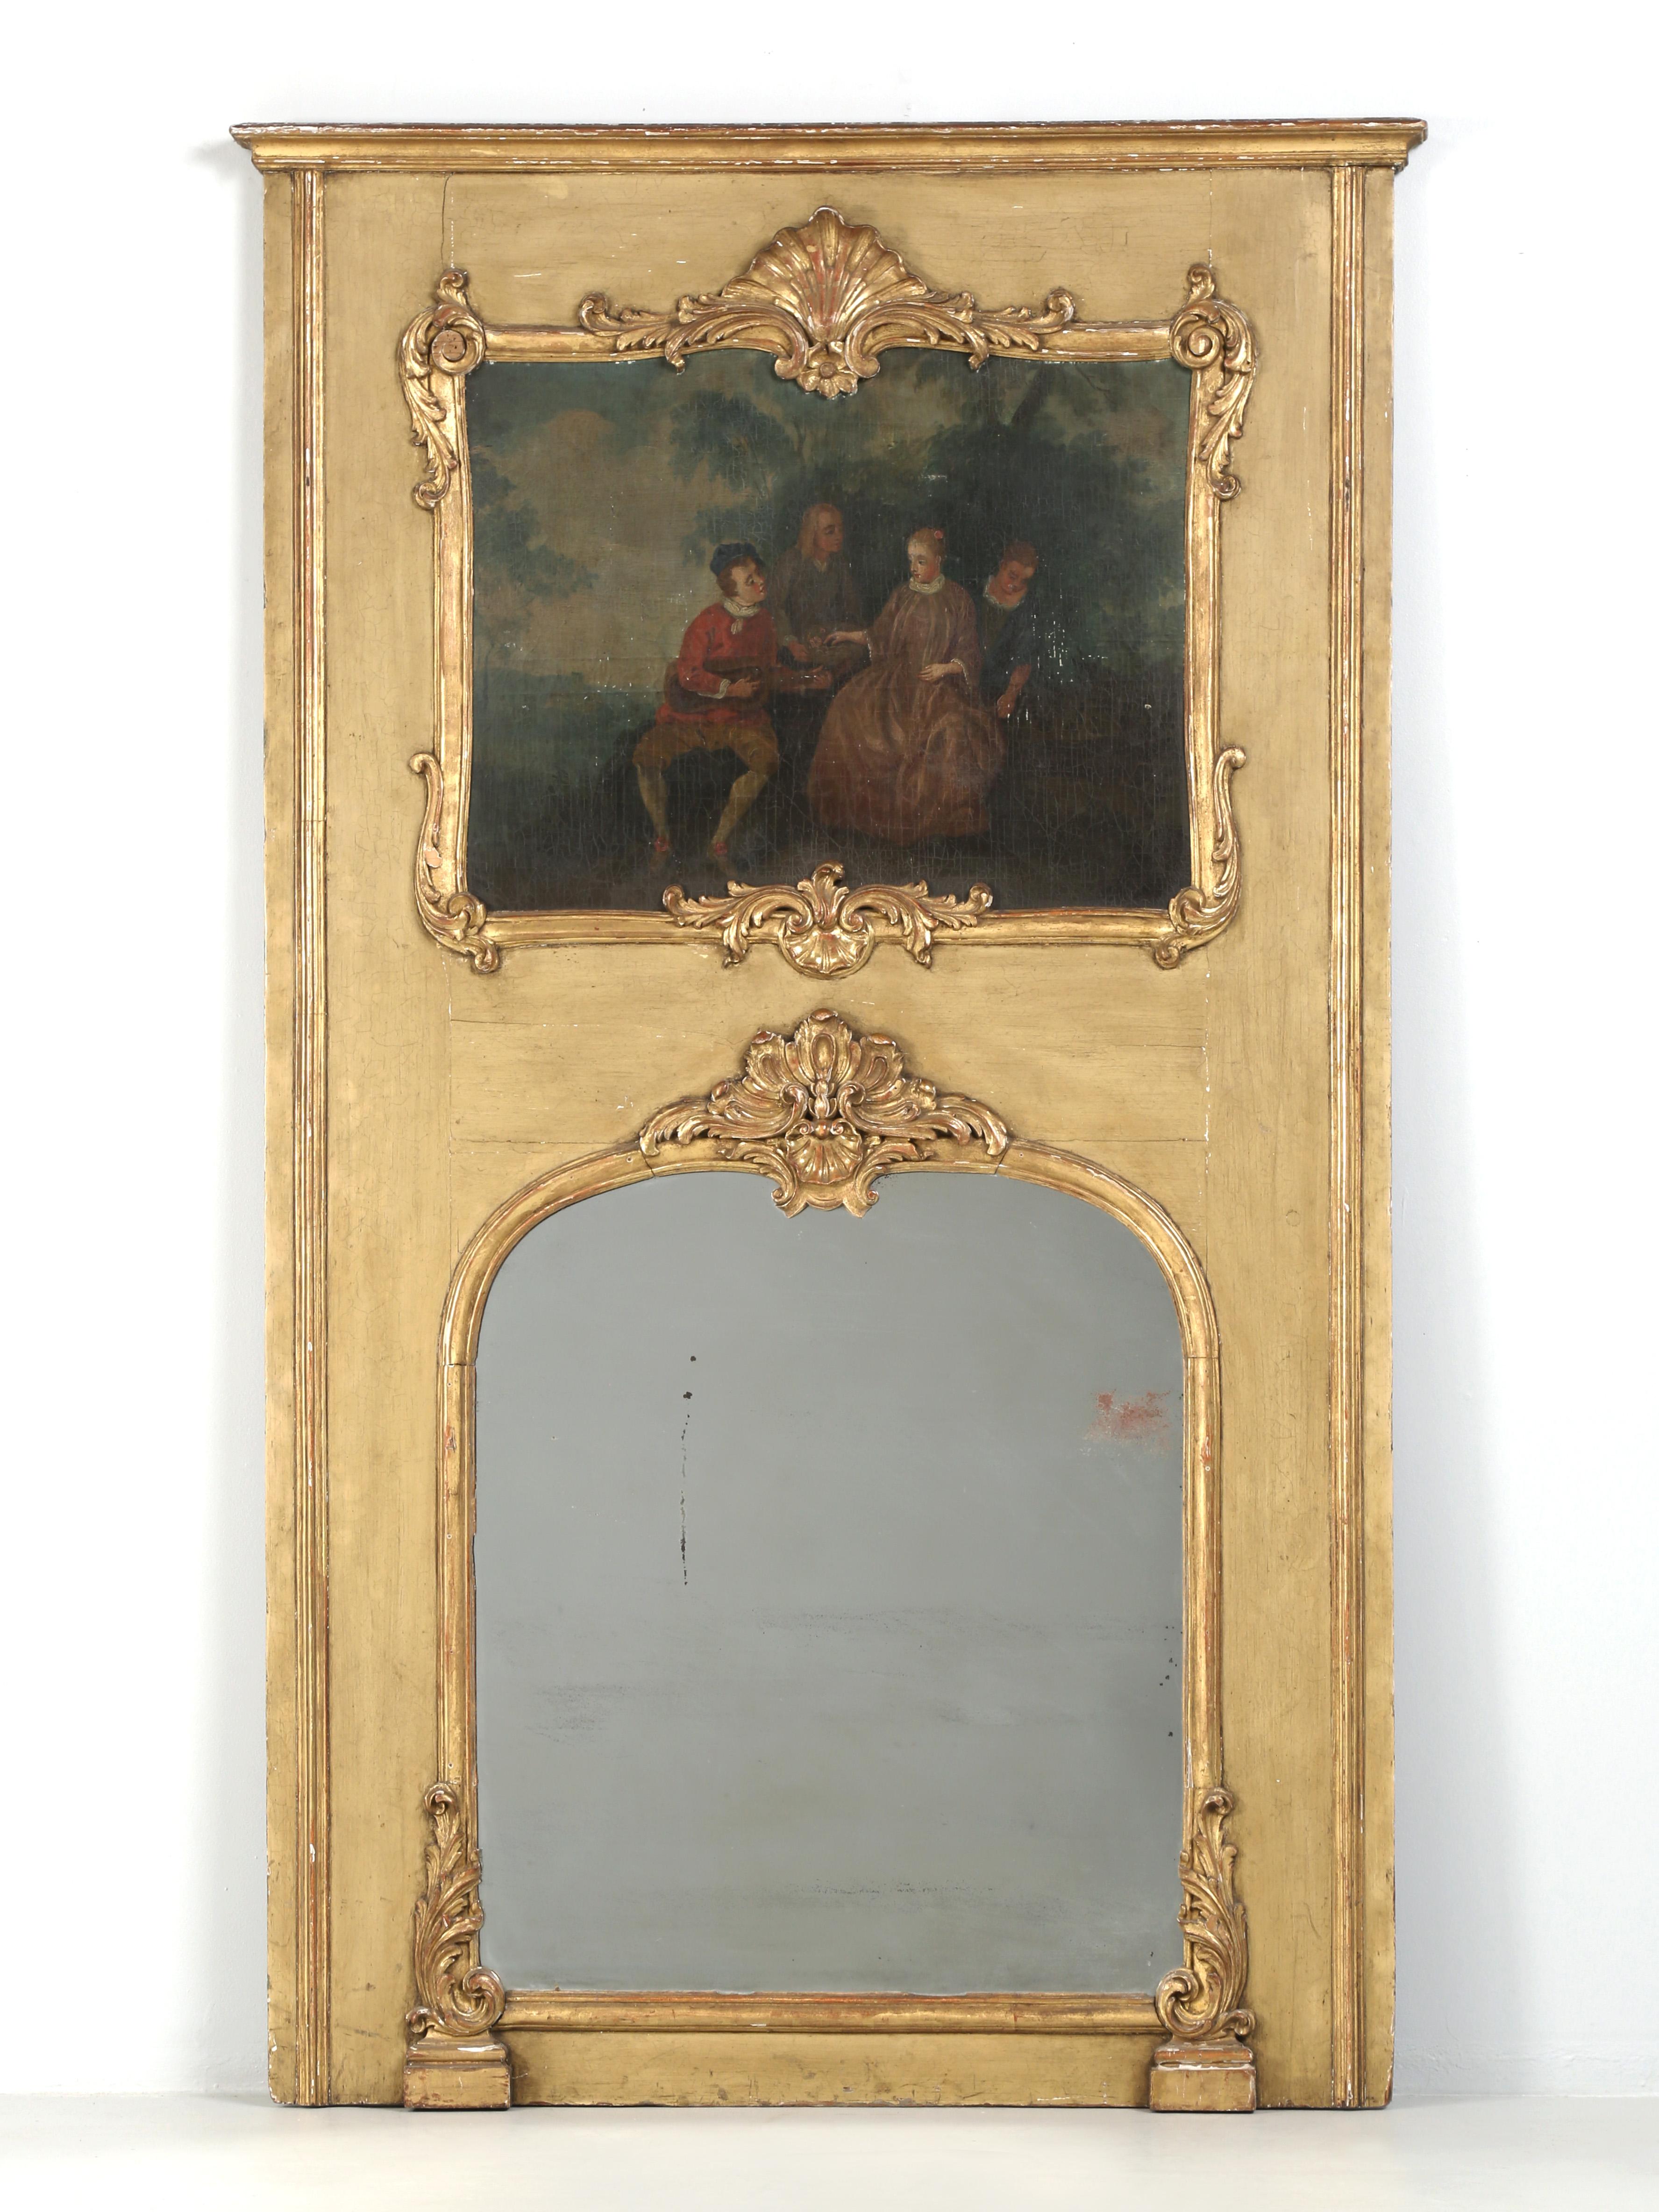 Trumeau Mirrors are a type of Mirror originally manufactured by the French in the late 1700’s and we would date this Antique Trumeau Mirror from that period of time. The word Trumeau is defined by the space between two windows, where a tall Trumeau